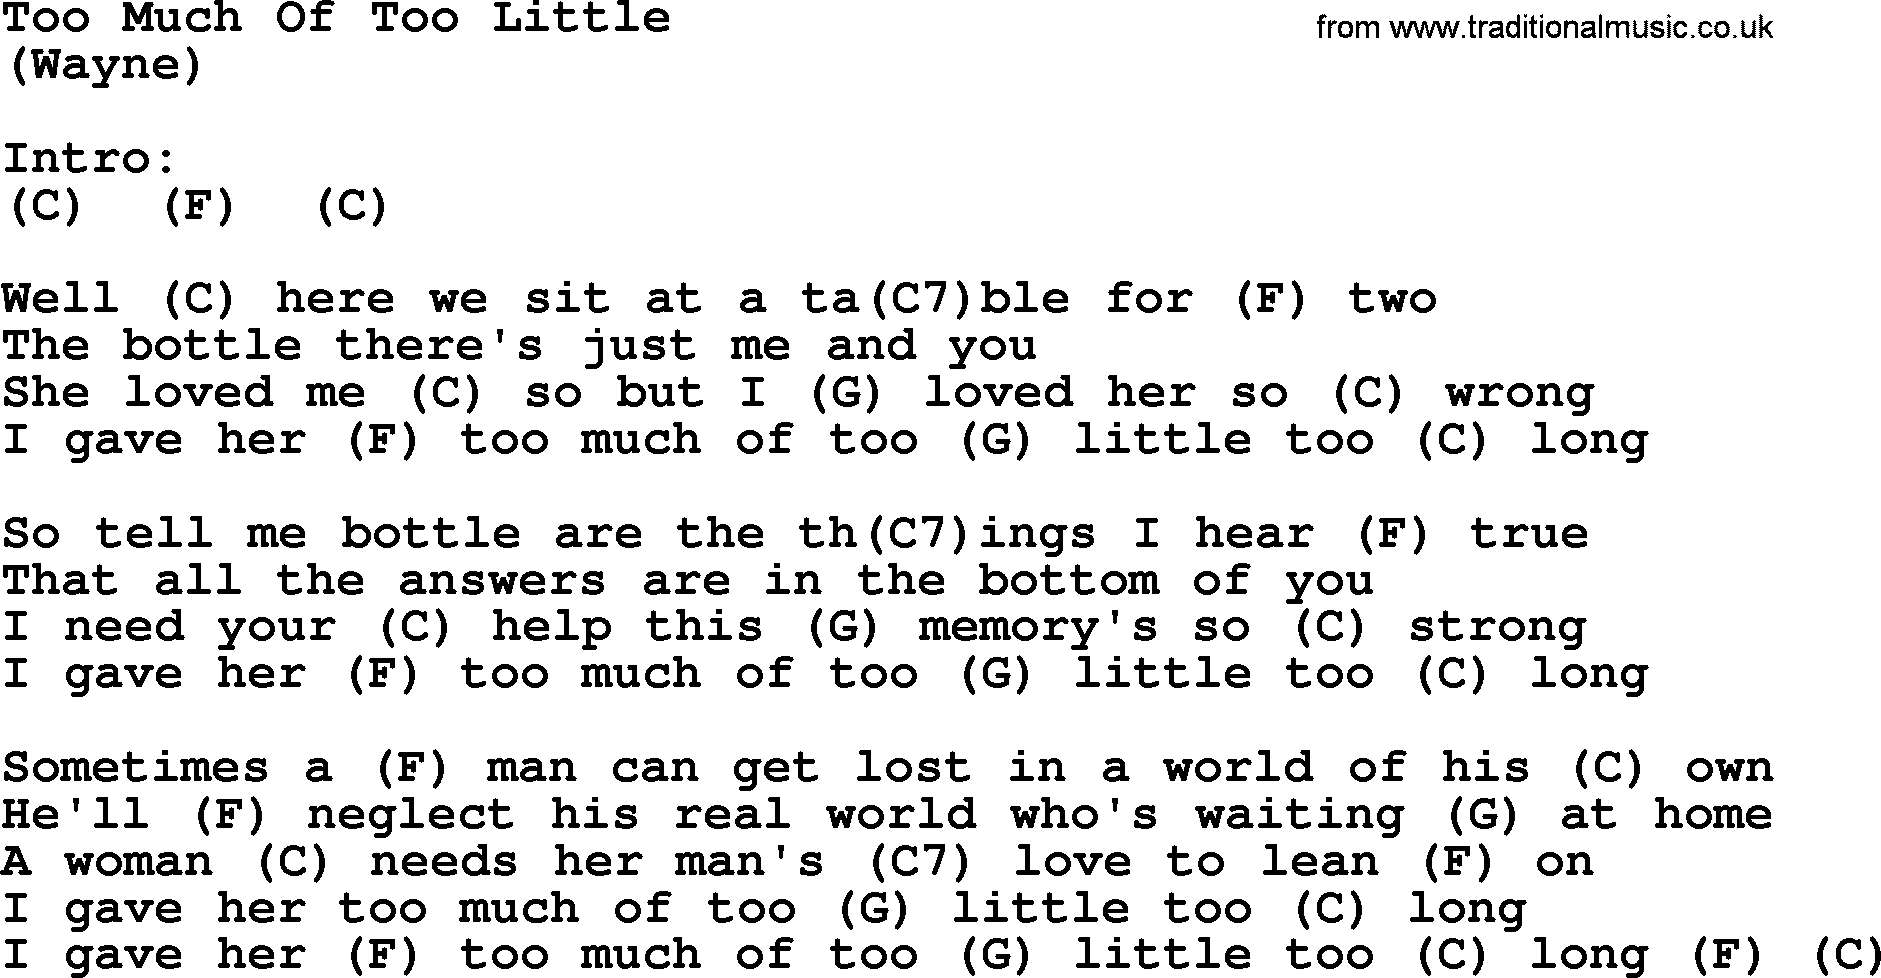 George Strait song: Too Much Of Too Little, lyrics and chords